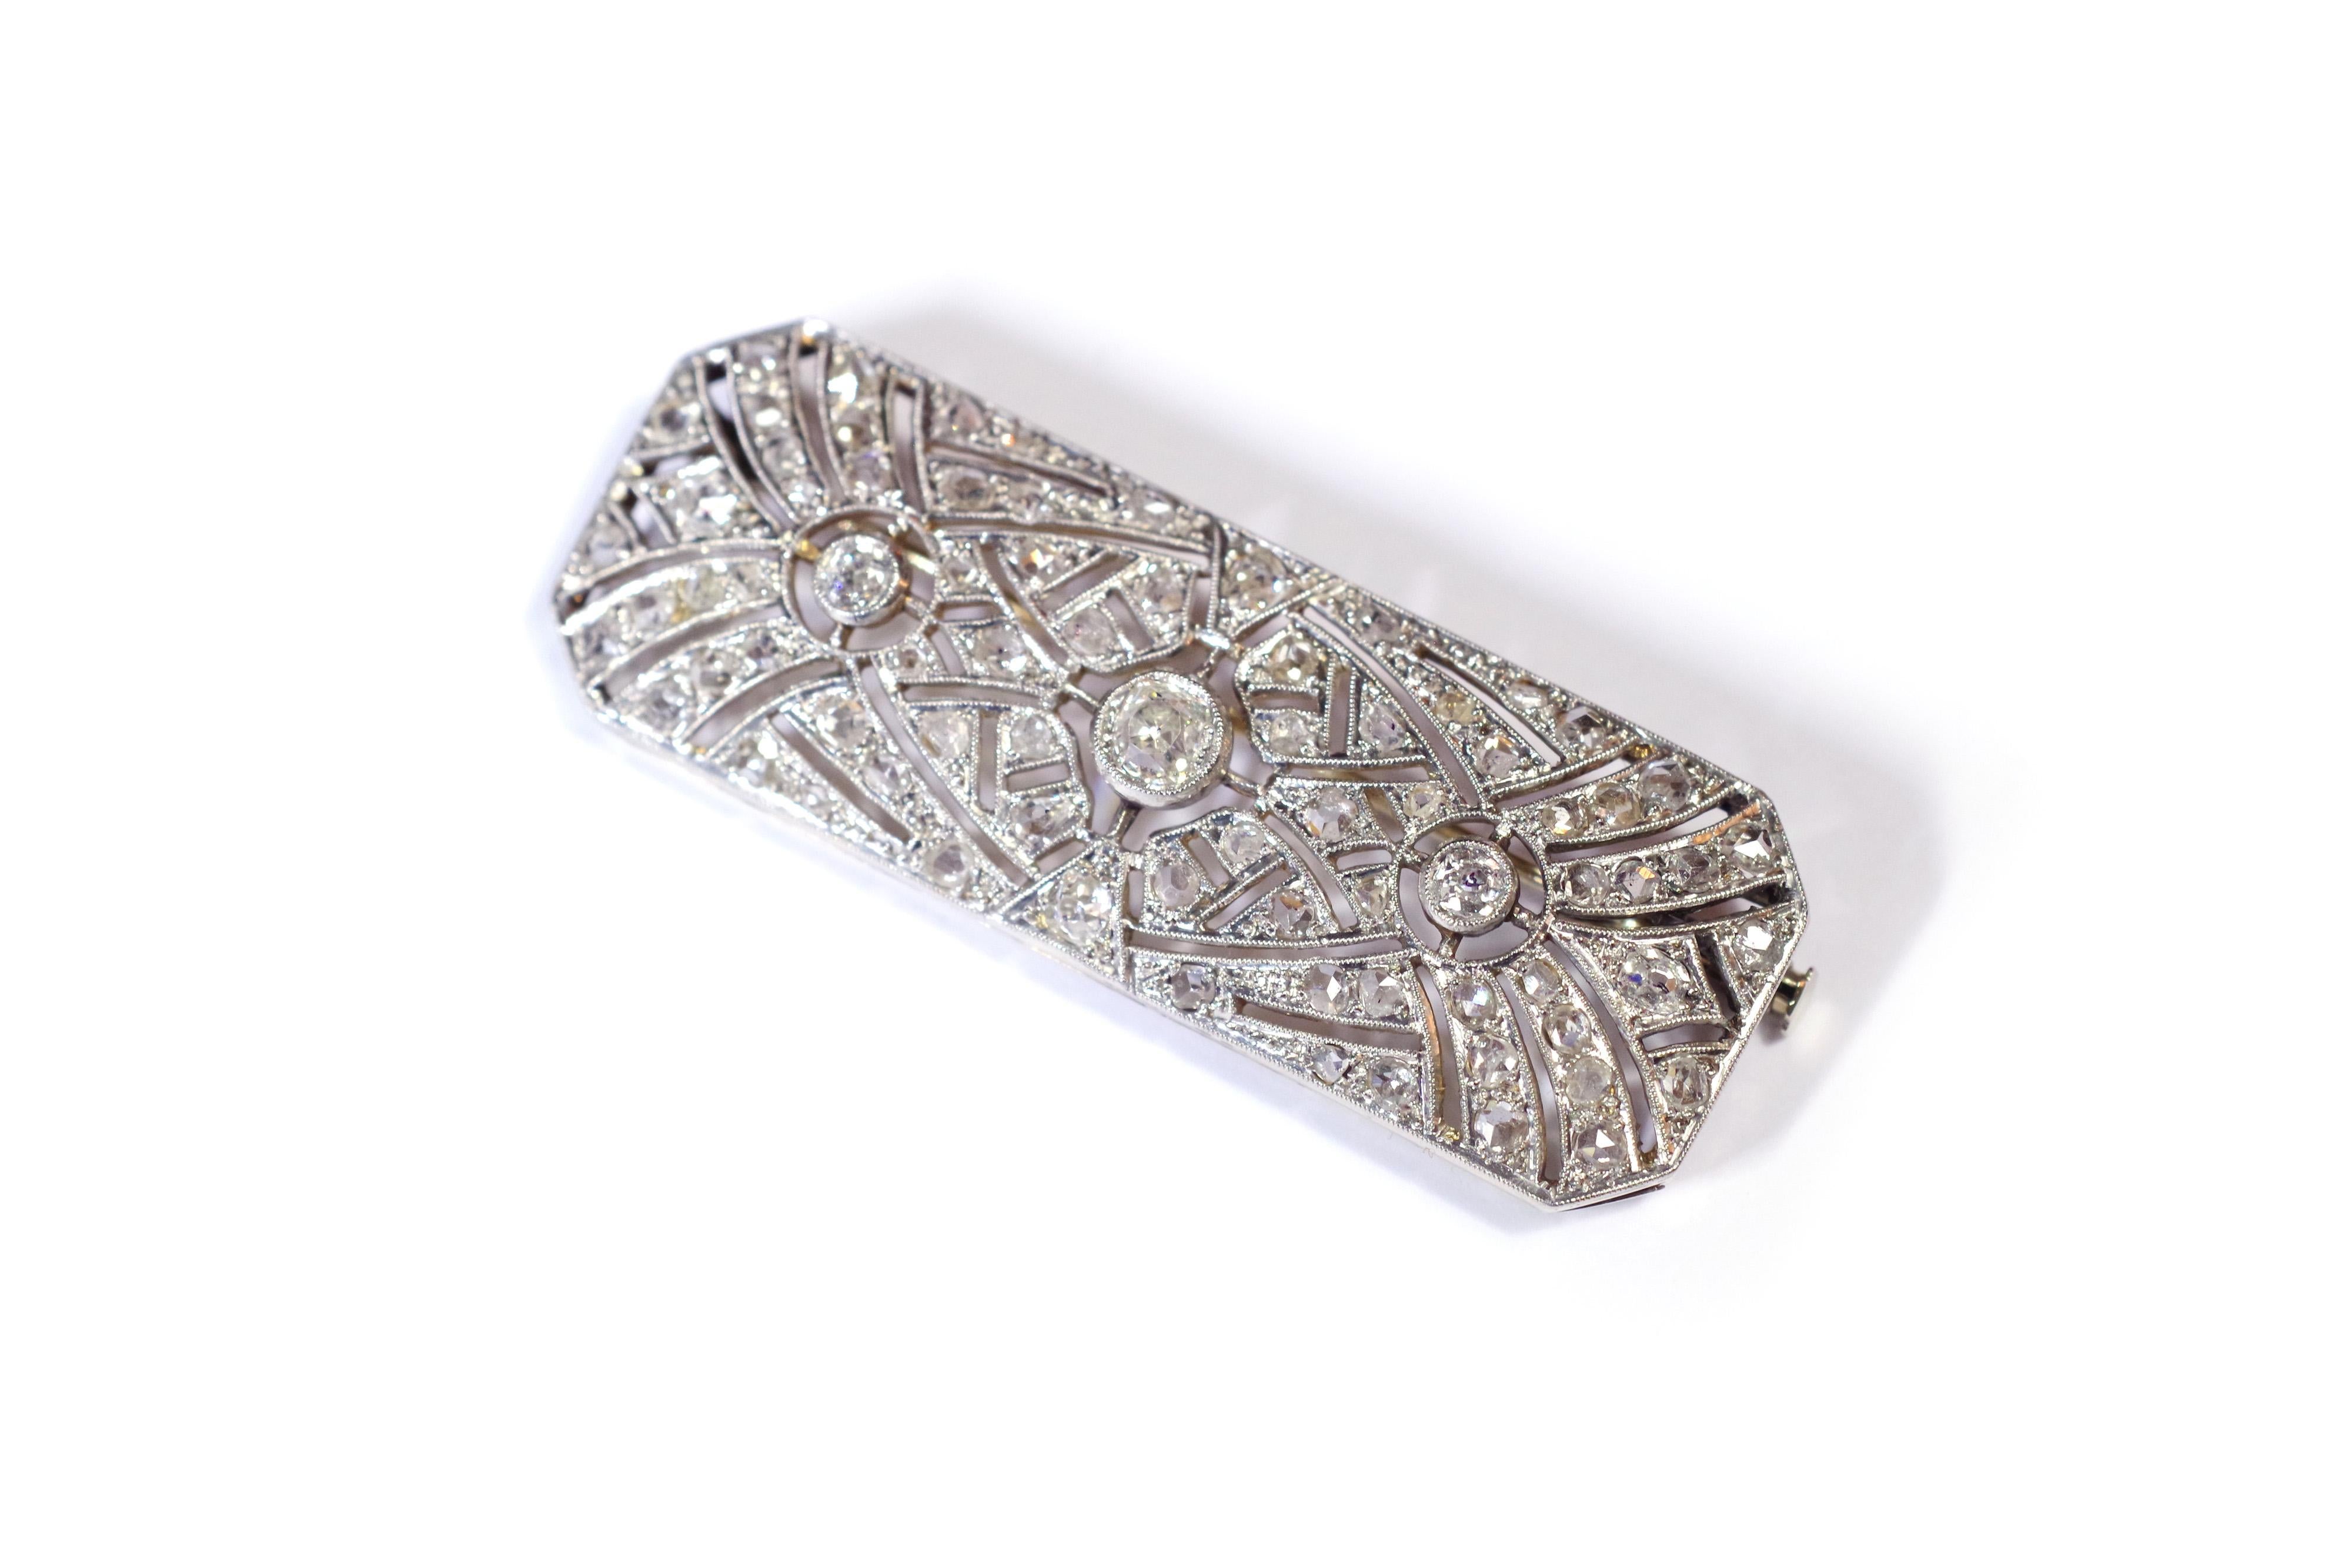 Art Deco diamond brooch in platinum and 18 karat white gold. With its straight geometric lines and openwork design, this octagonal brooch is in keeping with the typical trends of the Art Deco period. It is representative of the white jewellery that